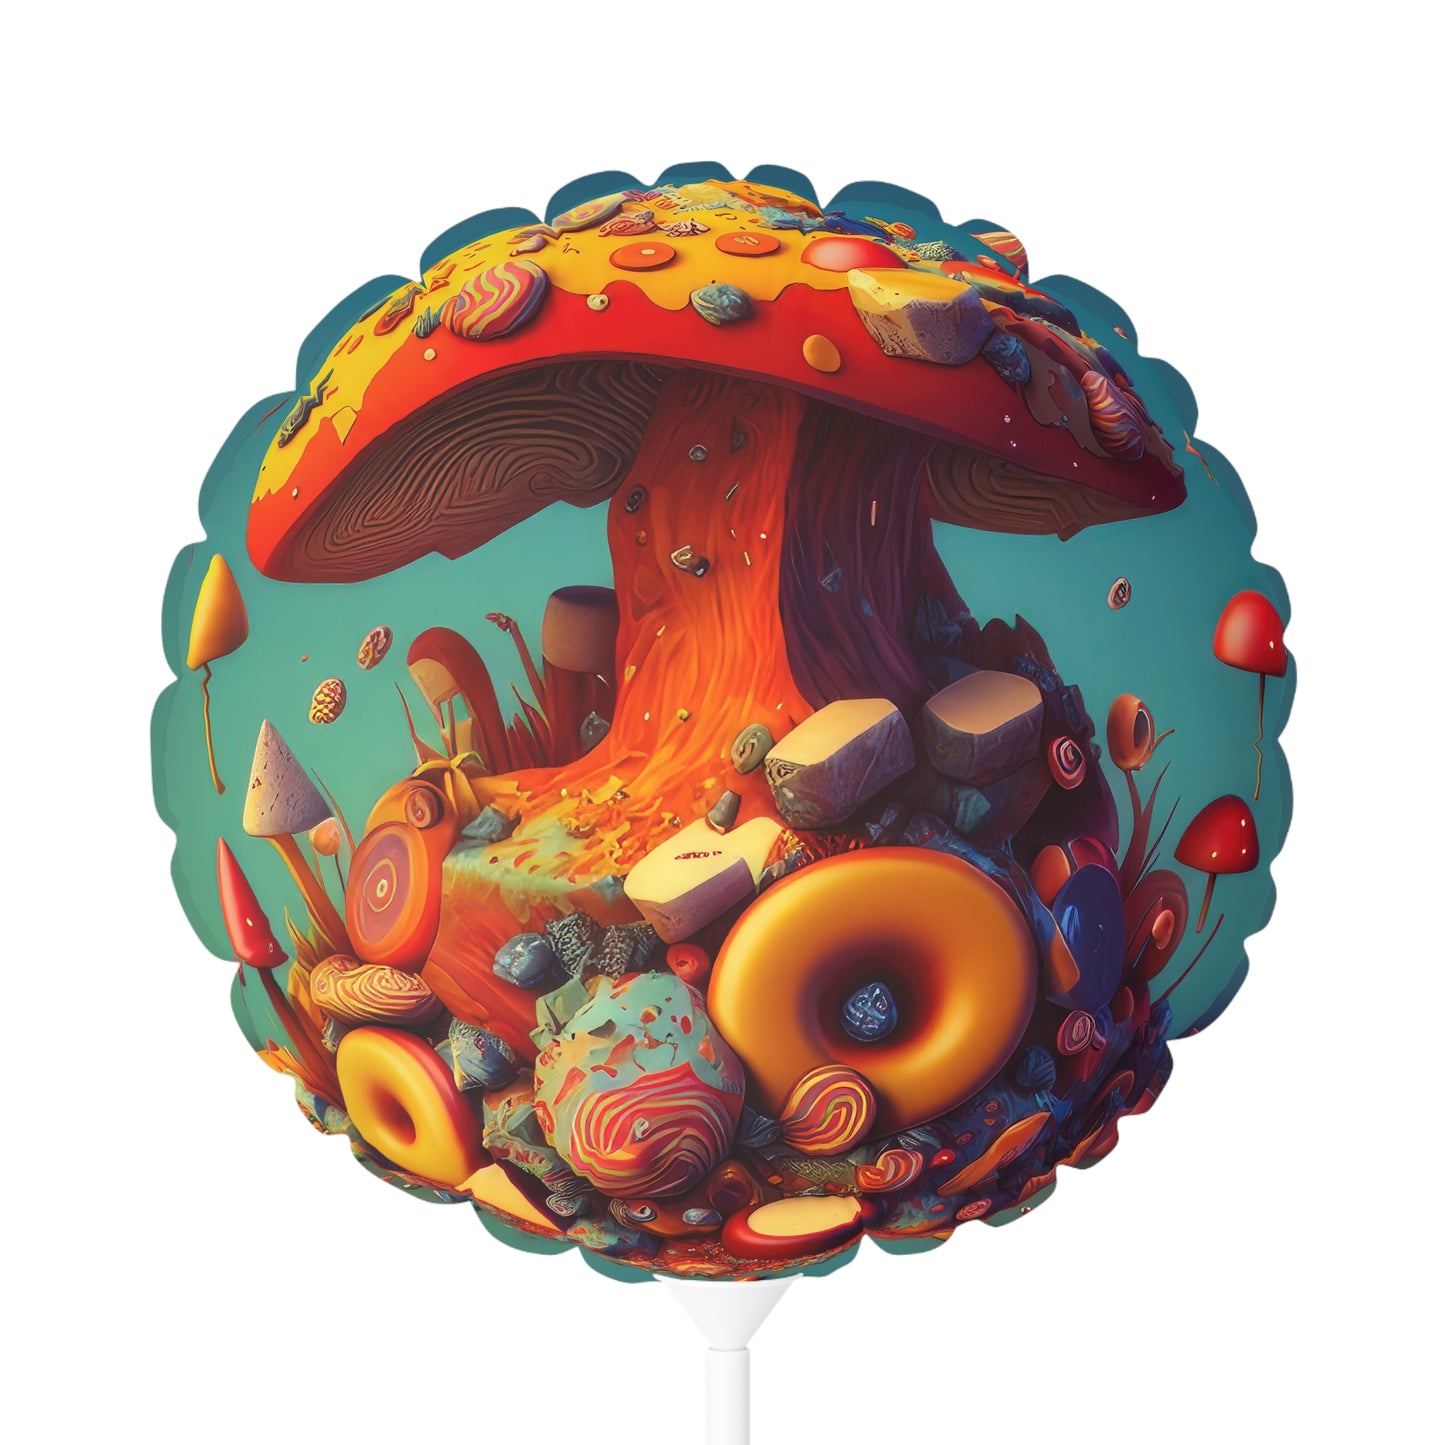 Hippie Mushroom Color Candy Style Design Style 2 Balloon (Round and Heart-shaped), 11"